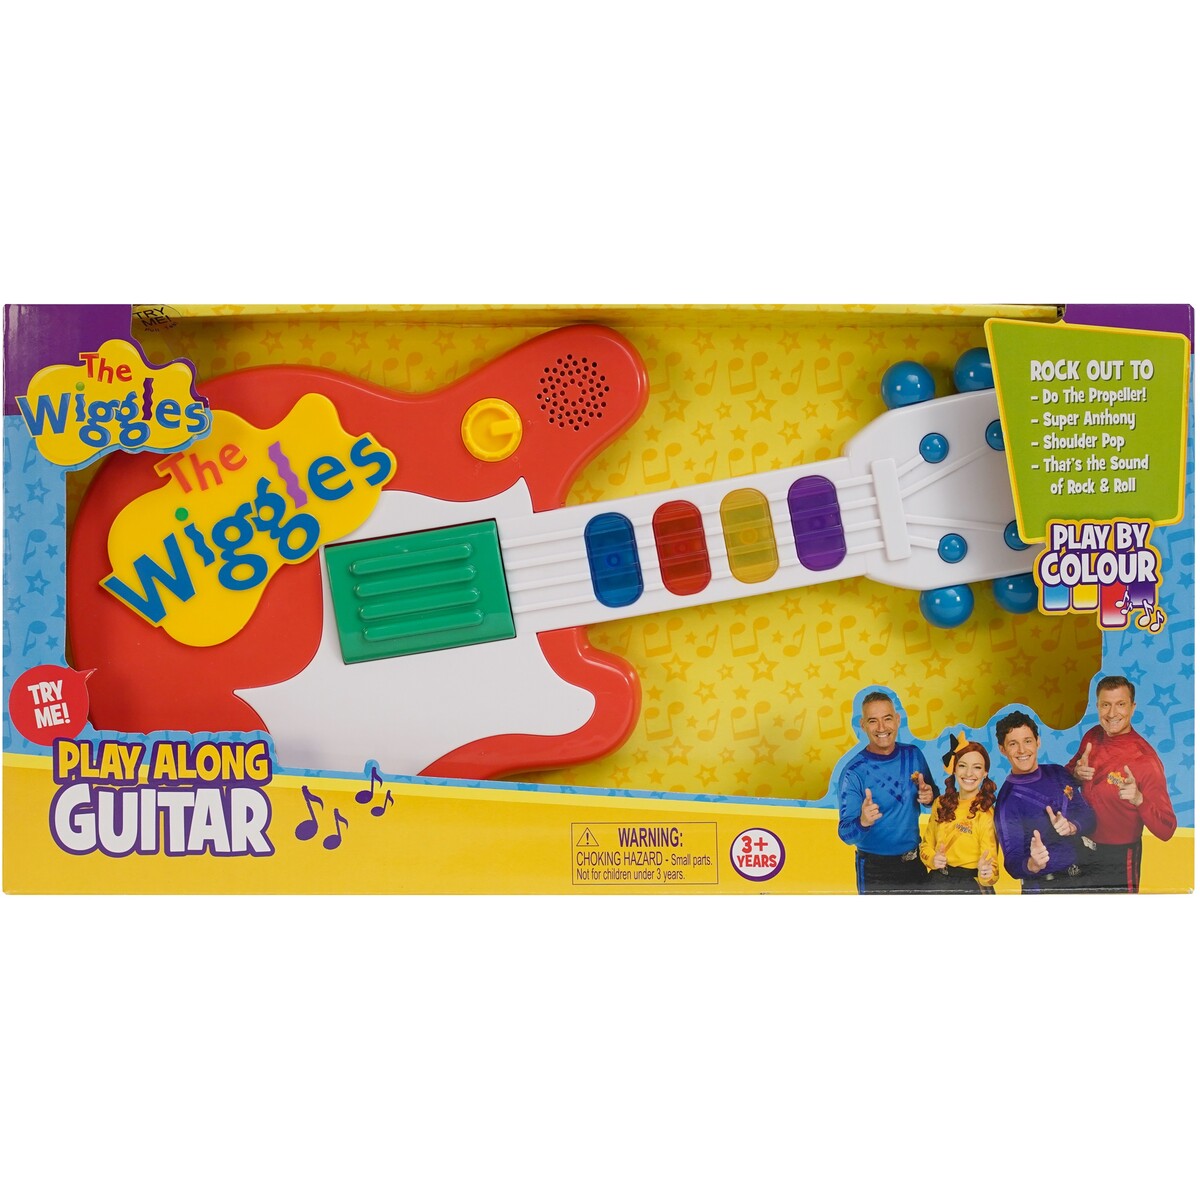 THE WIGGLES ELECTRONIC GUITAR